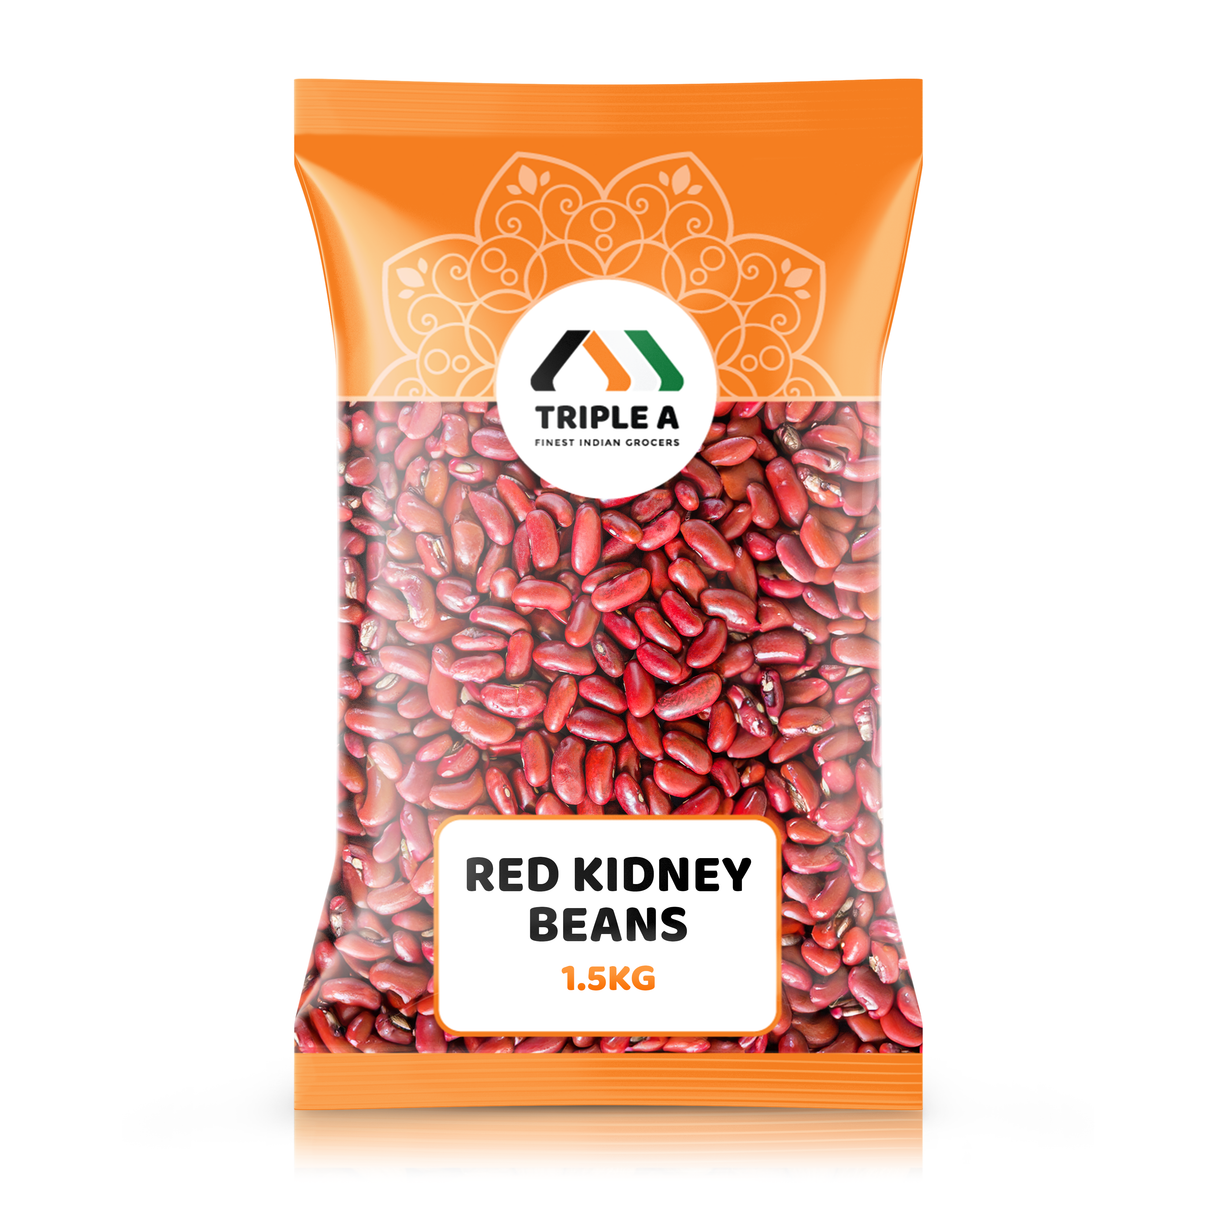 Triple A Red Kidney Beans 1.5Kg